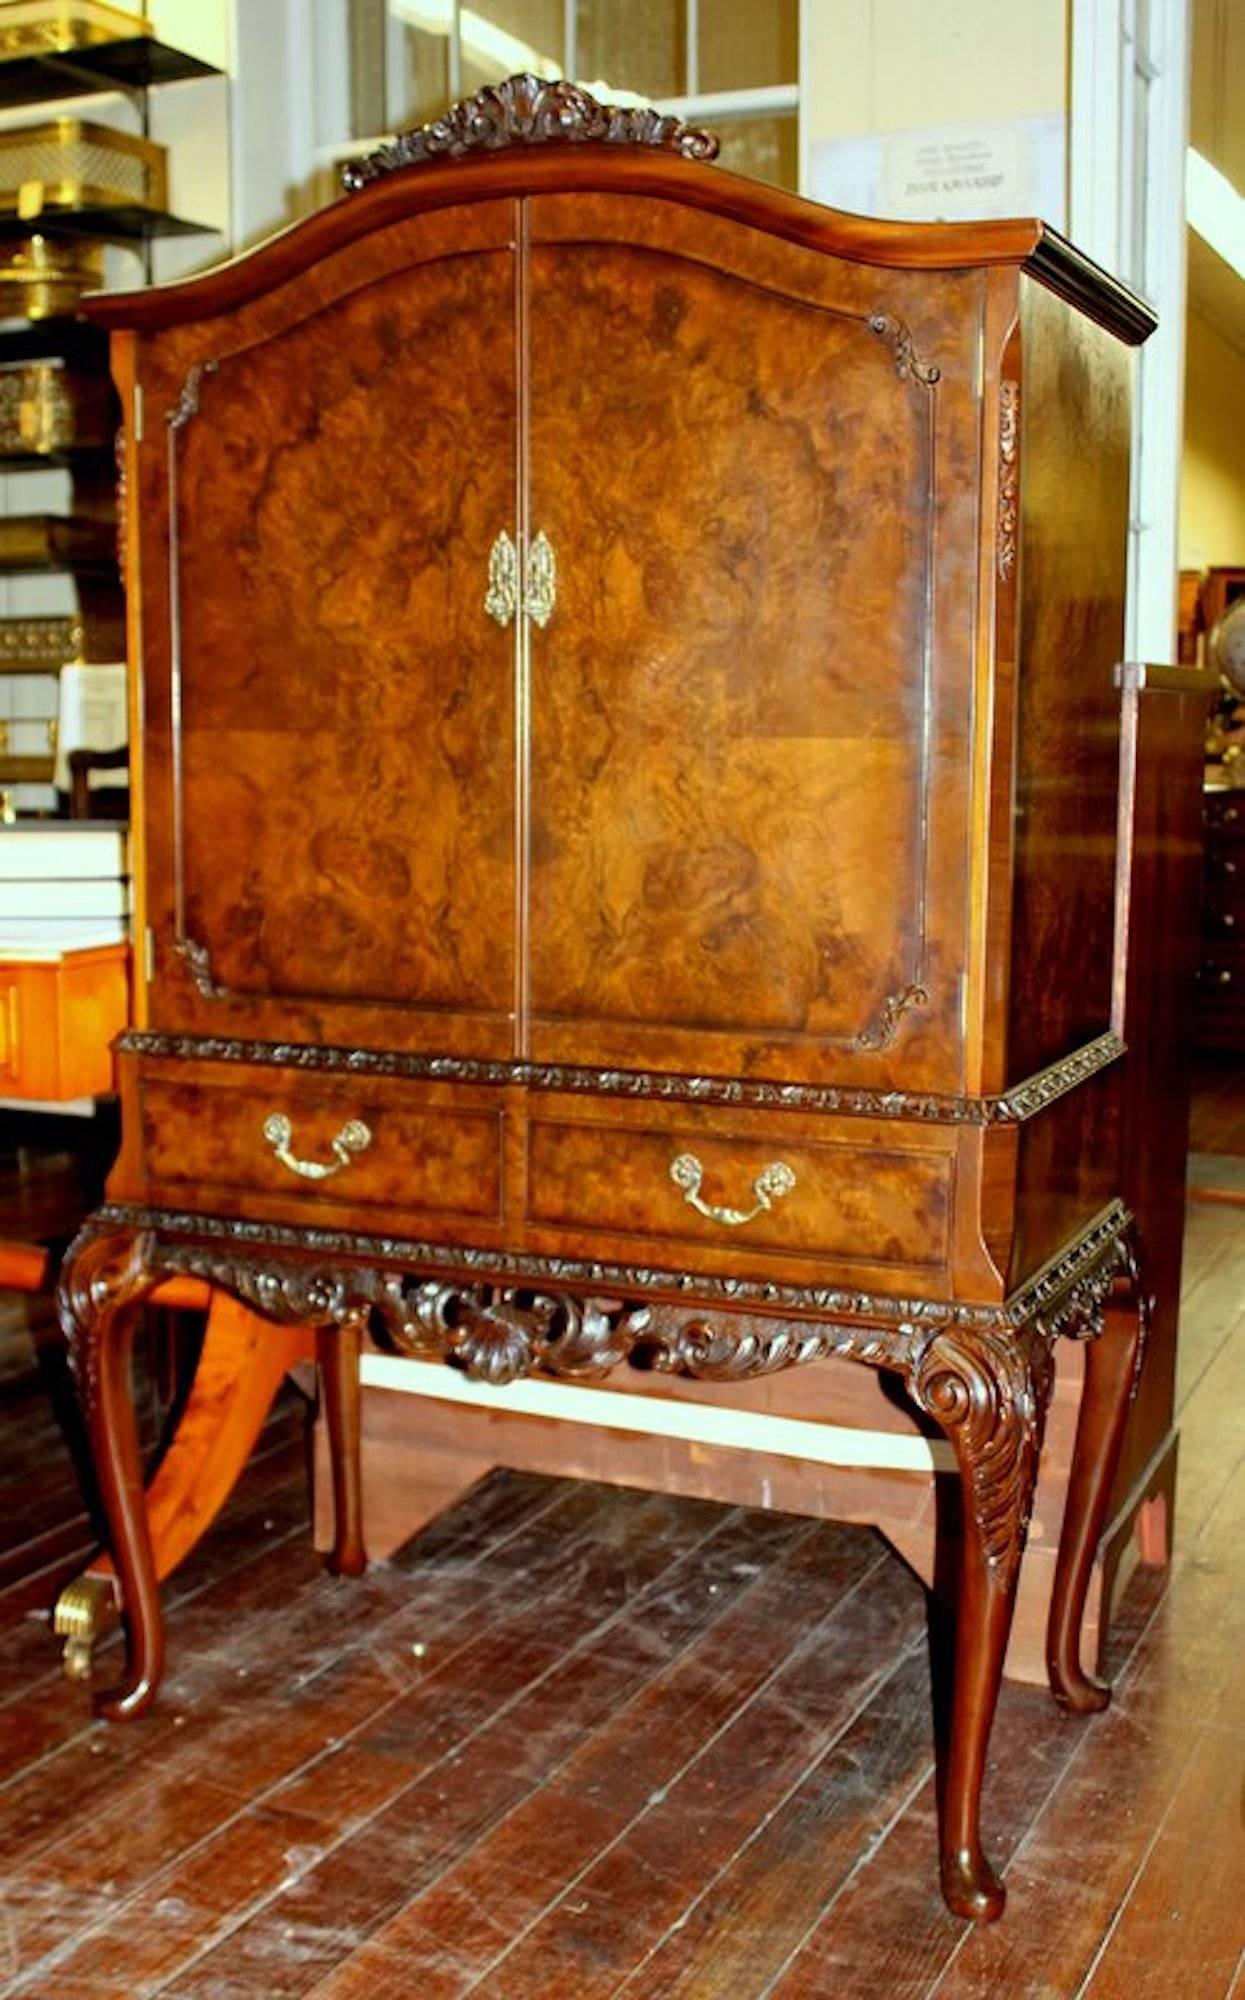 Extraordinary quality Old English bookmatched burr walnut and hand-carved Georgian style drinks cabinet

